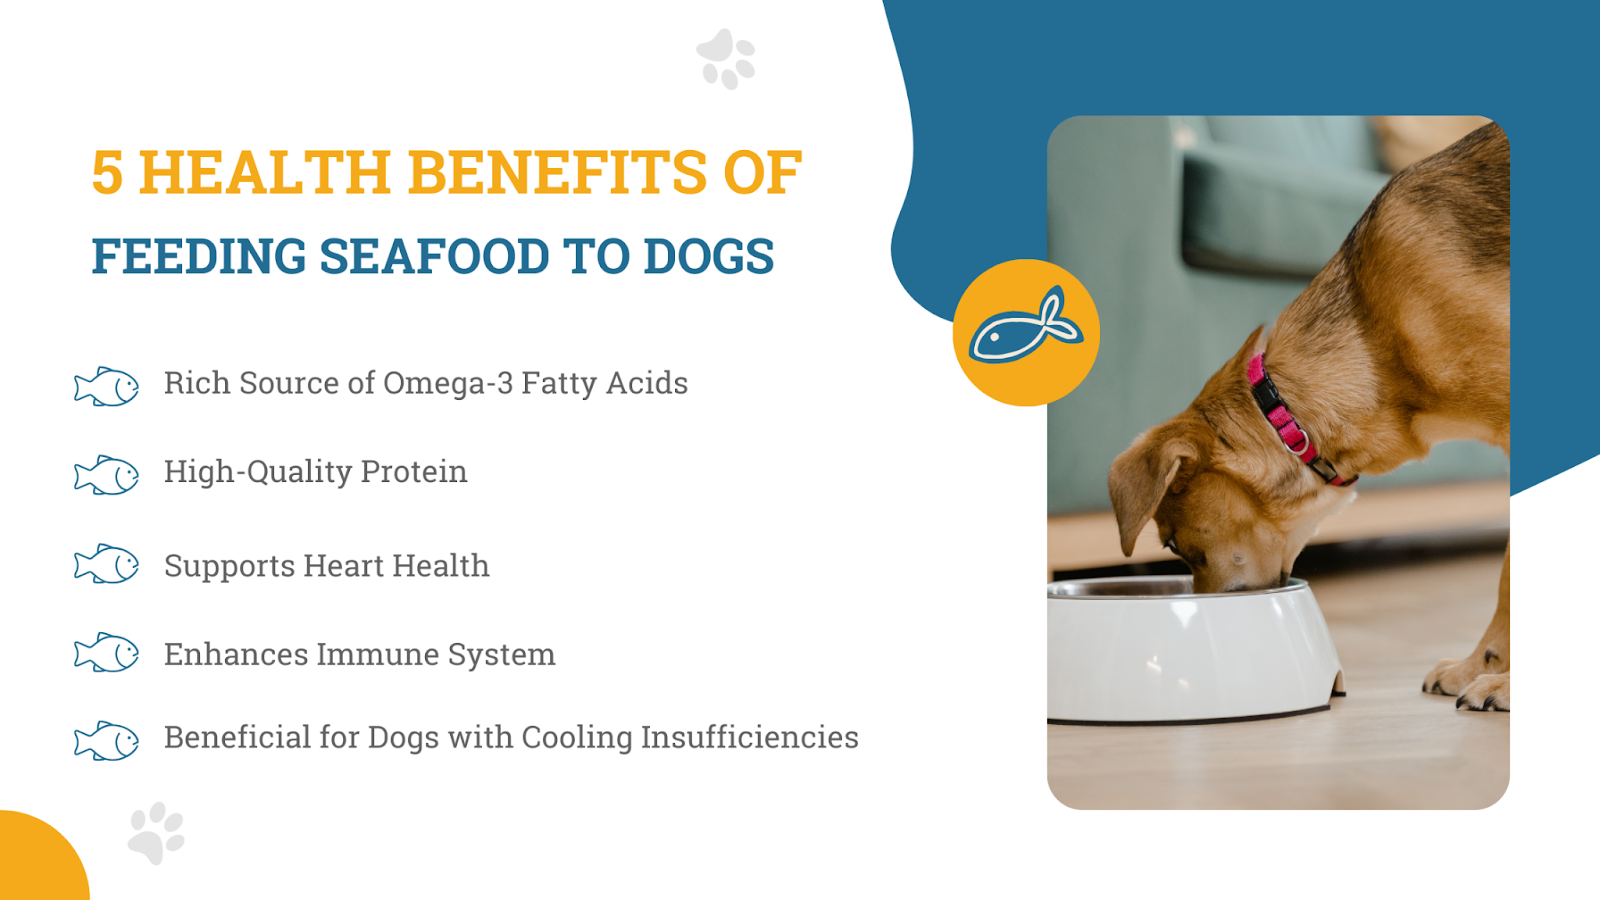 Health benefits of feeding seafood to dogs